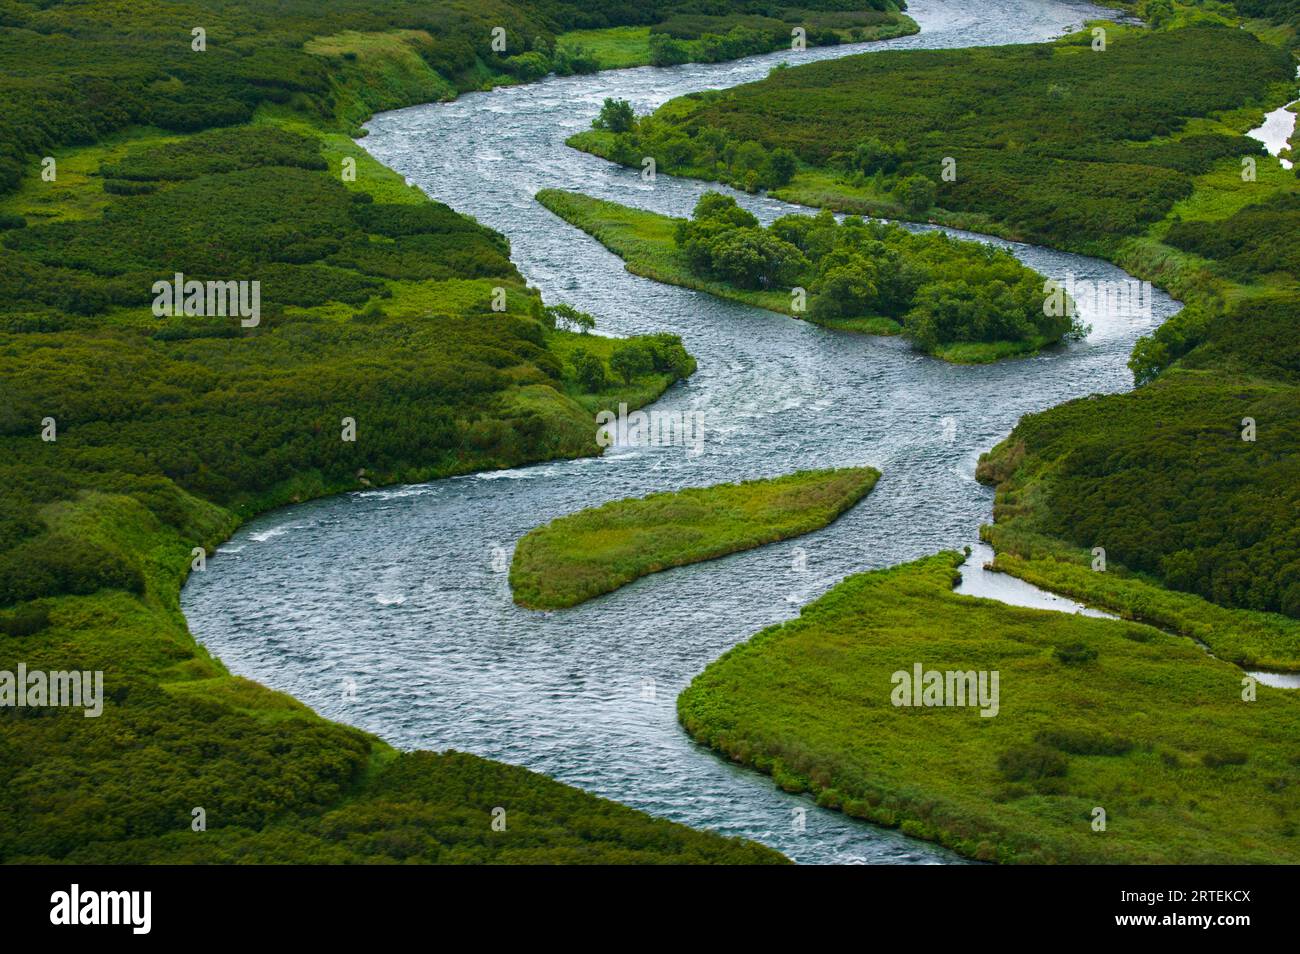 Salmon spawn in Kronotsky Nature Reserve's clear running rivers; Kronotsky Zapovednik, Kamchatka, Russia Stock Photo